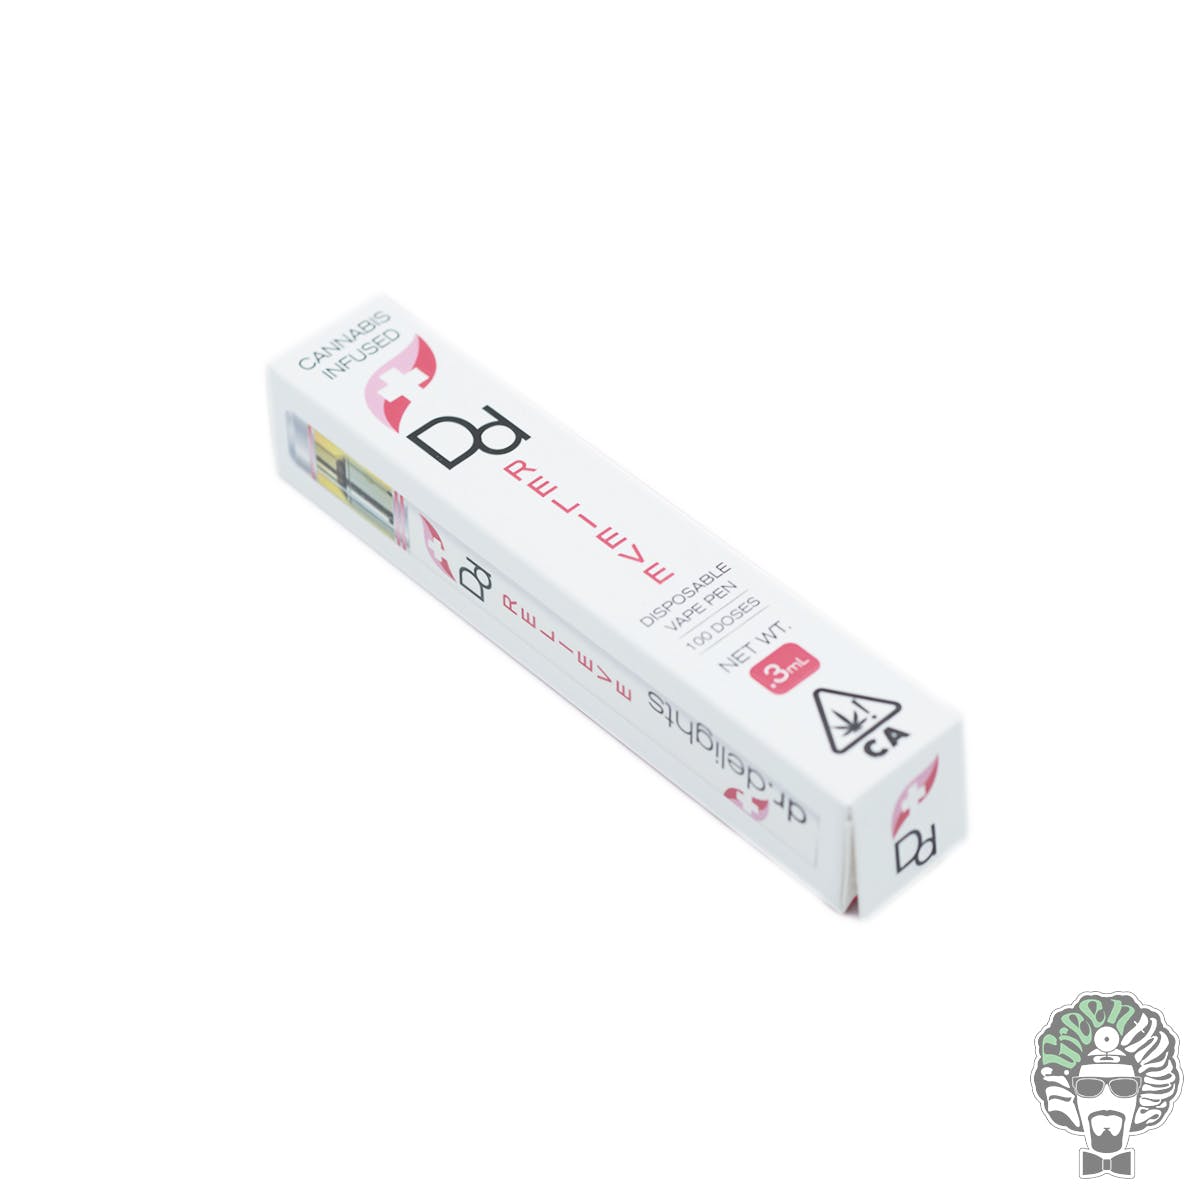 THC Relieve Disposable Vape Cartridge by Dr. Delight